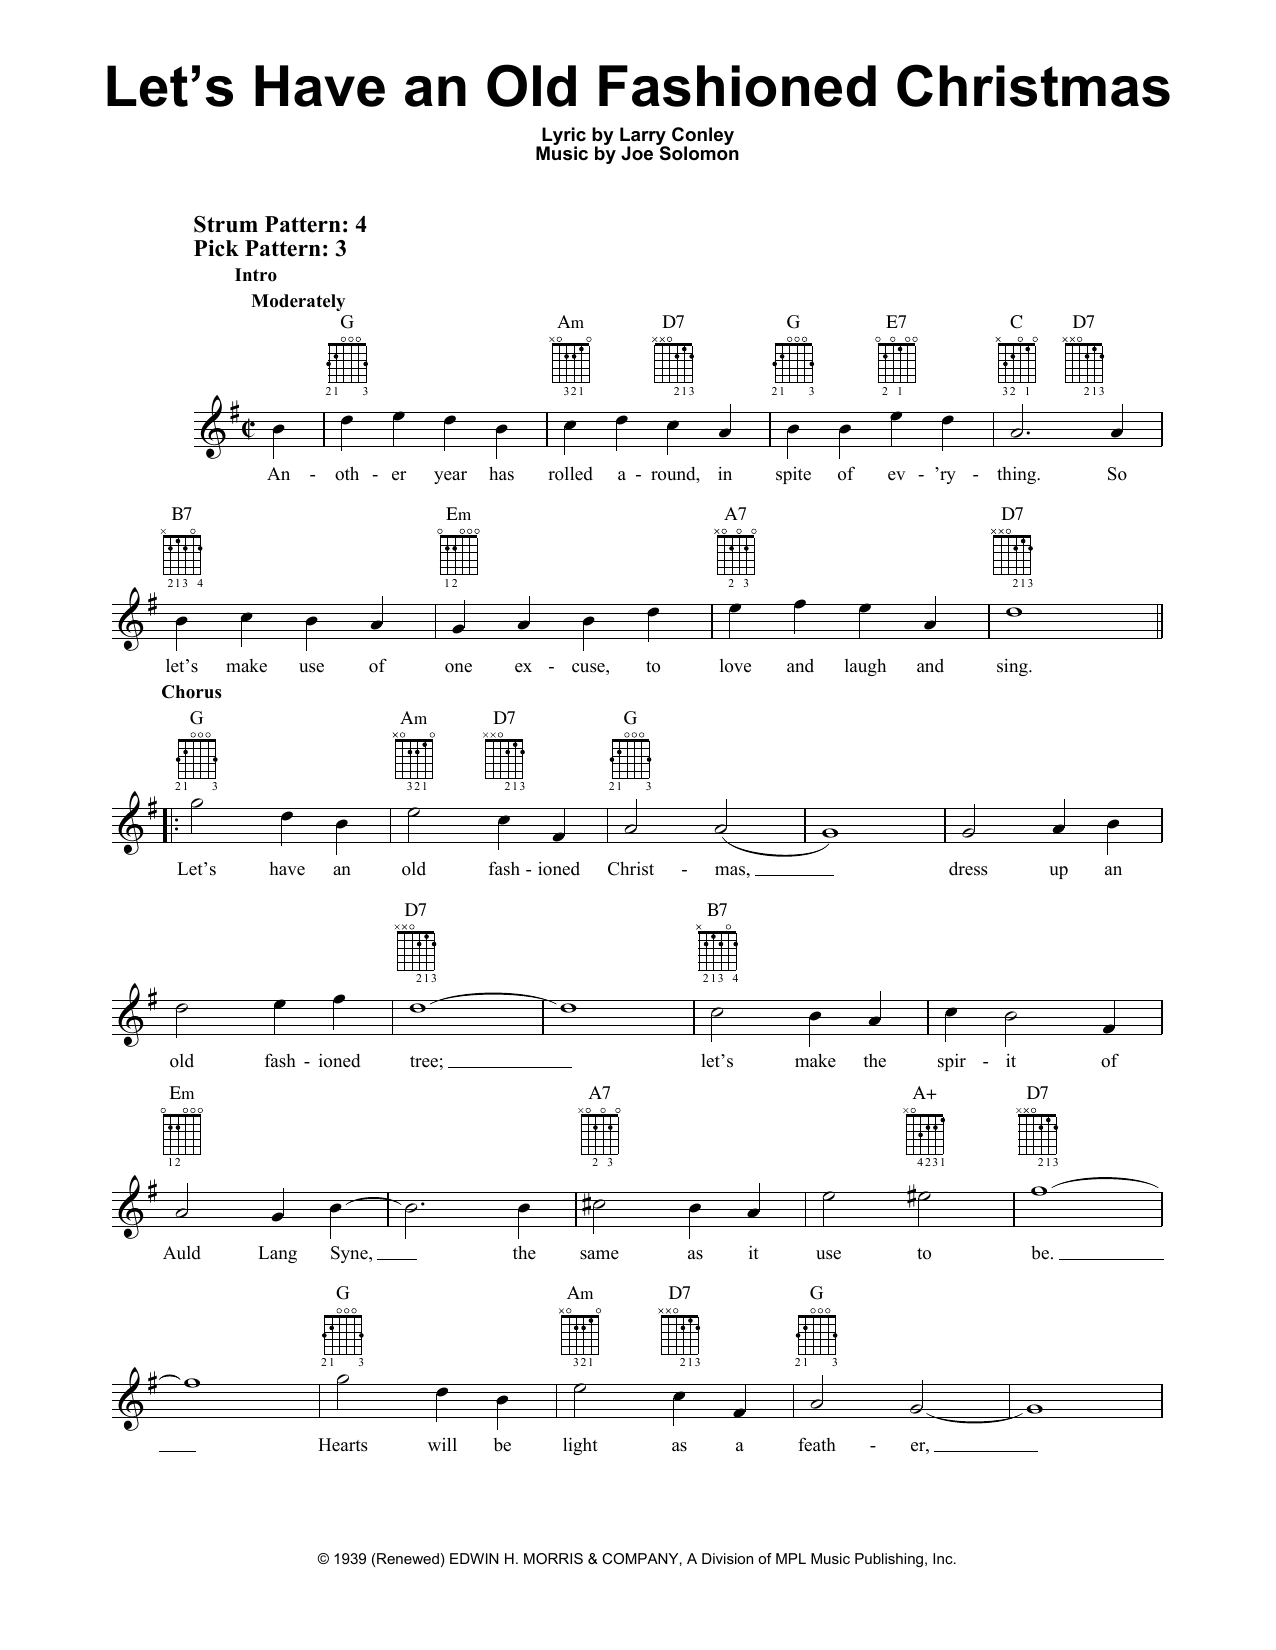 Download Joe Solomon Let's Have An Old Fashioned Christmas Sheet Music